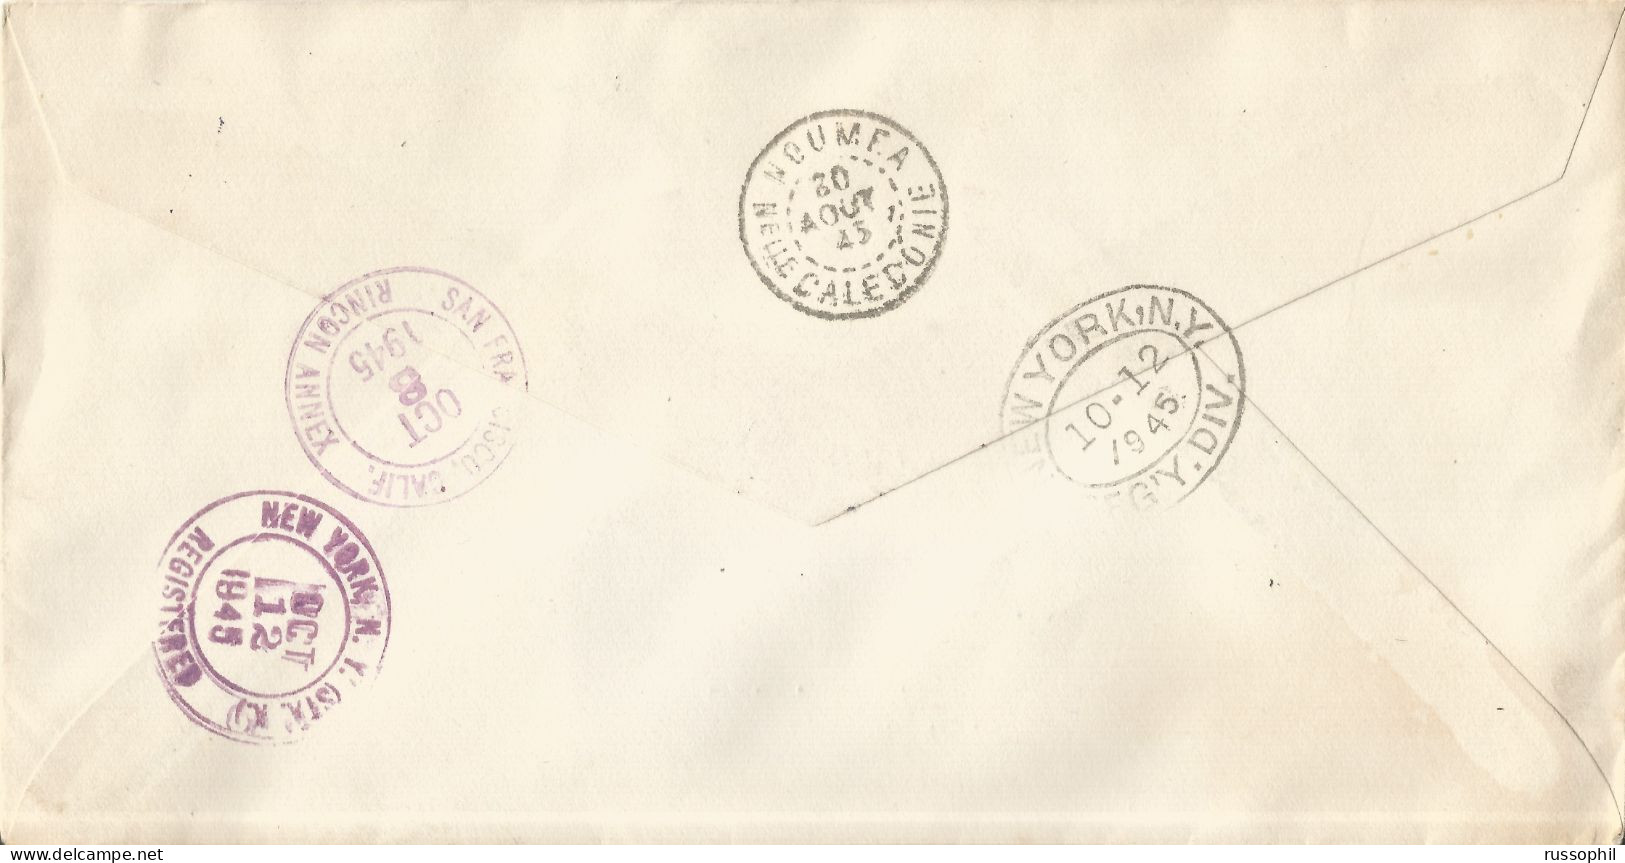 WALLIS AND FUTUNA - 7 STAMP 26 FR FRANKING "LONDON" ISSUE ON REGISTERED COVER TO THE USA - 1945 - Lettres & Documents